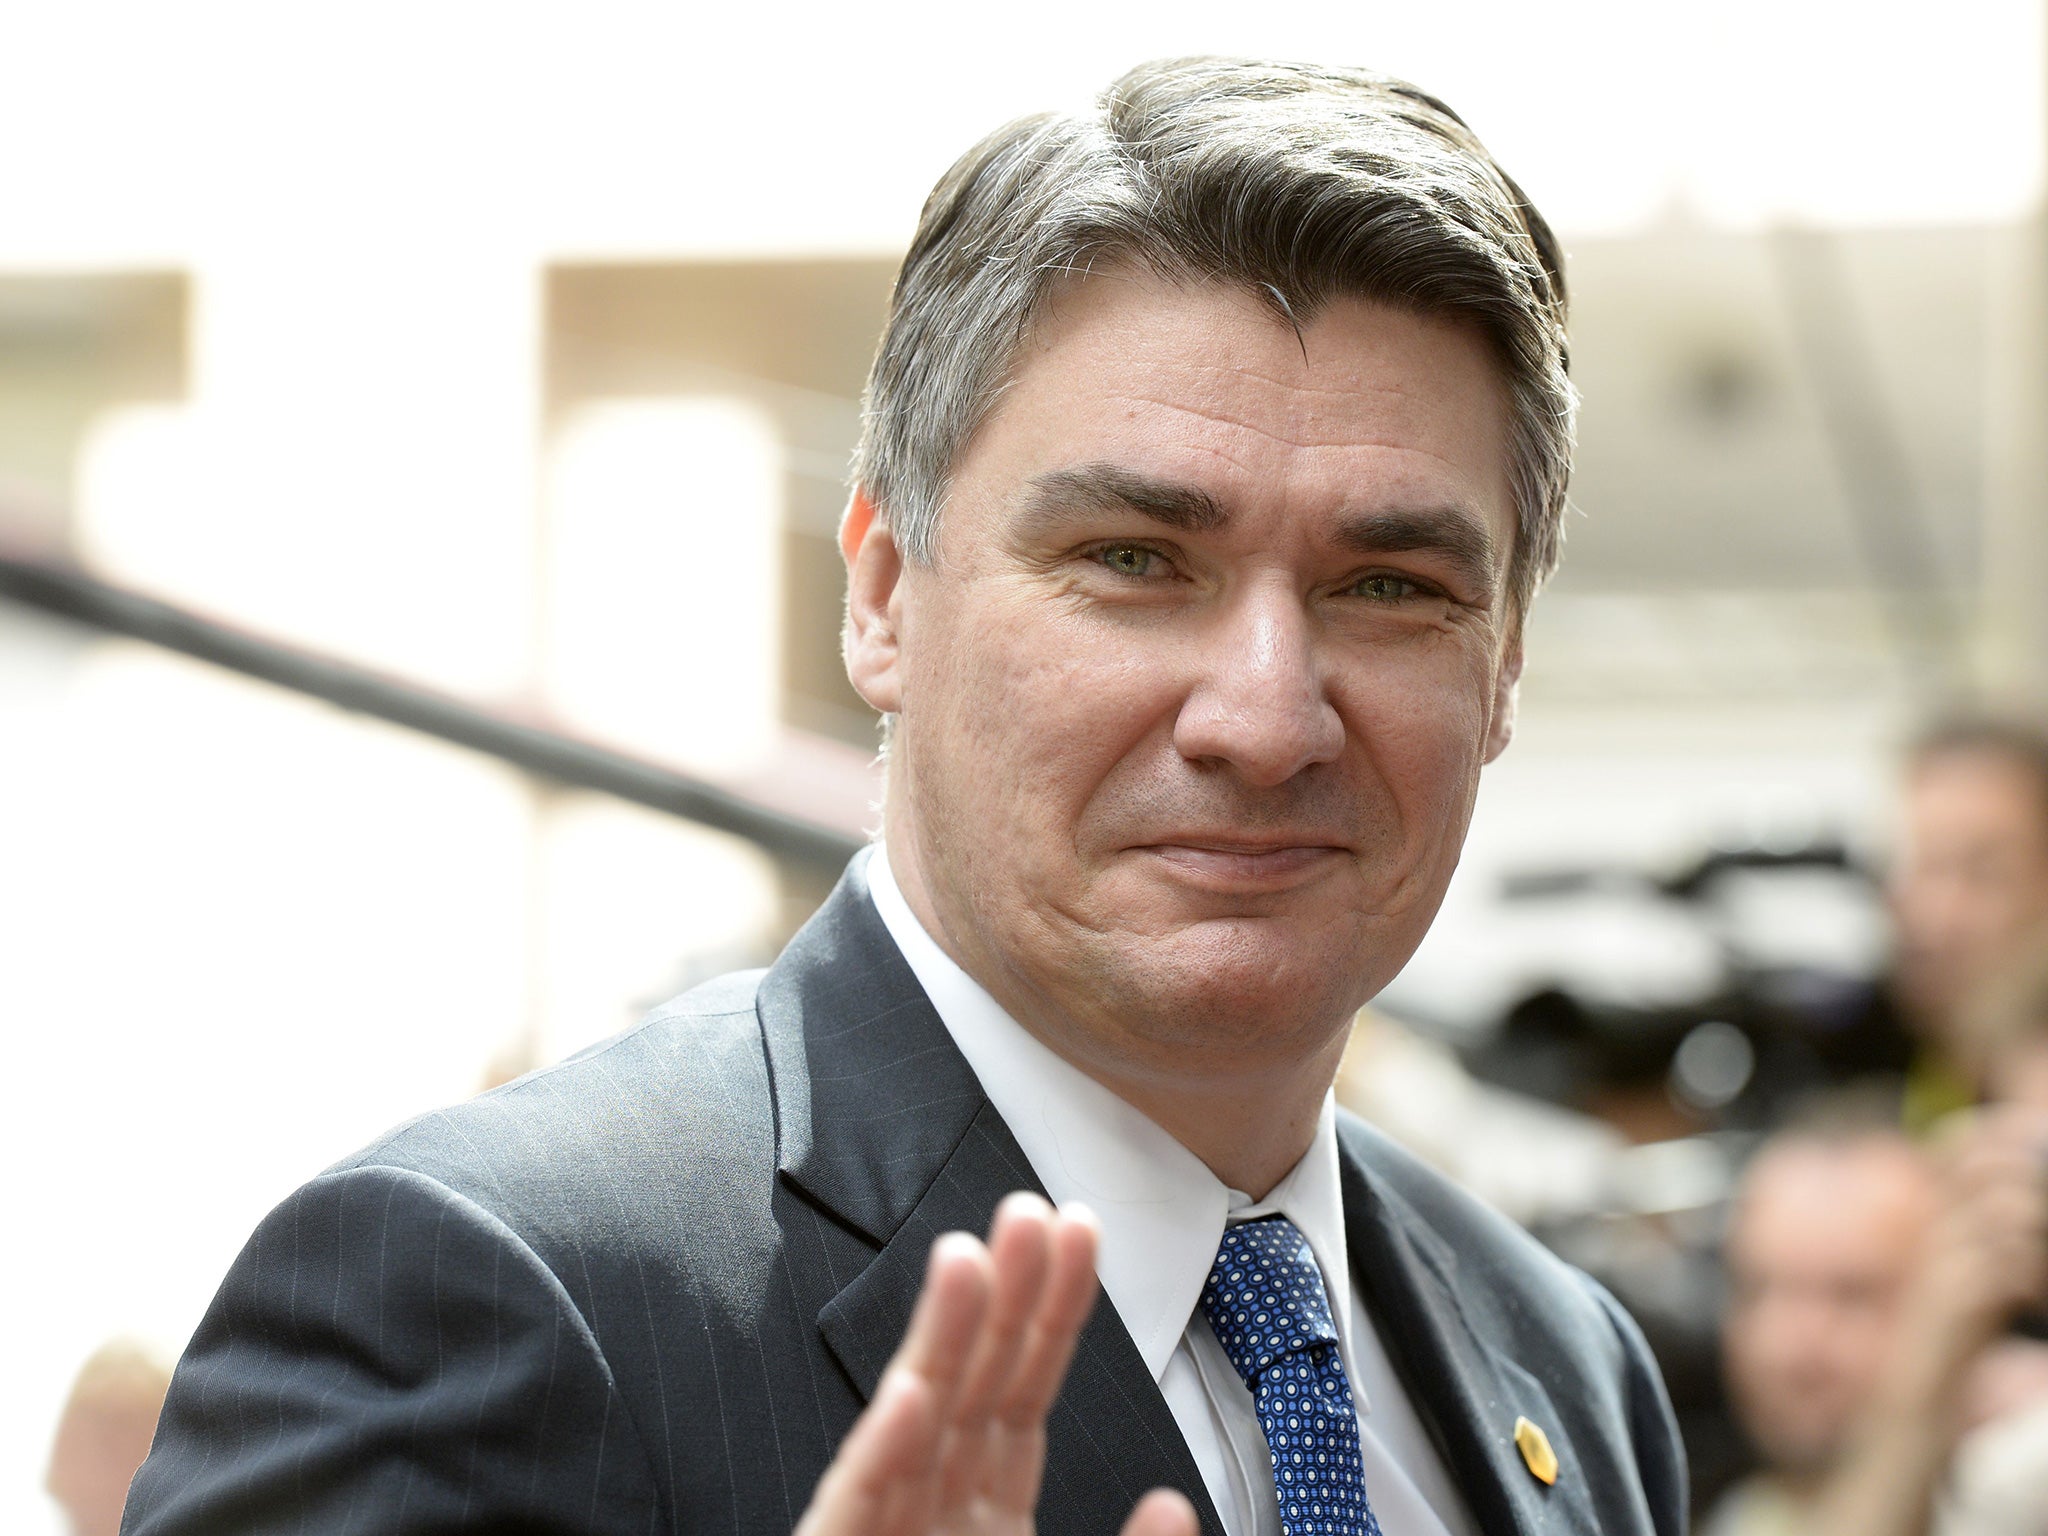 Prime Minister Zoran Milanovic arrives for day two of an EU summit